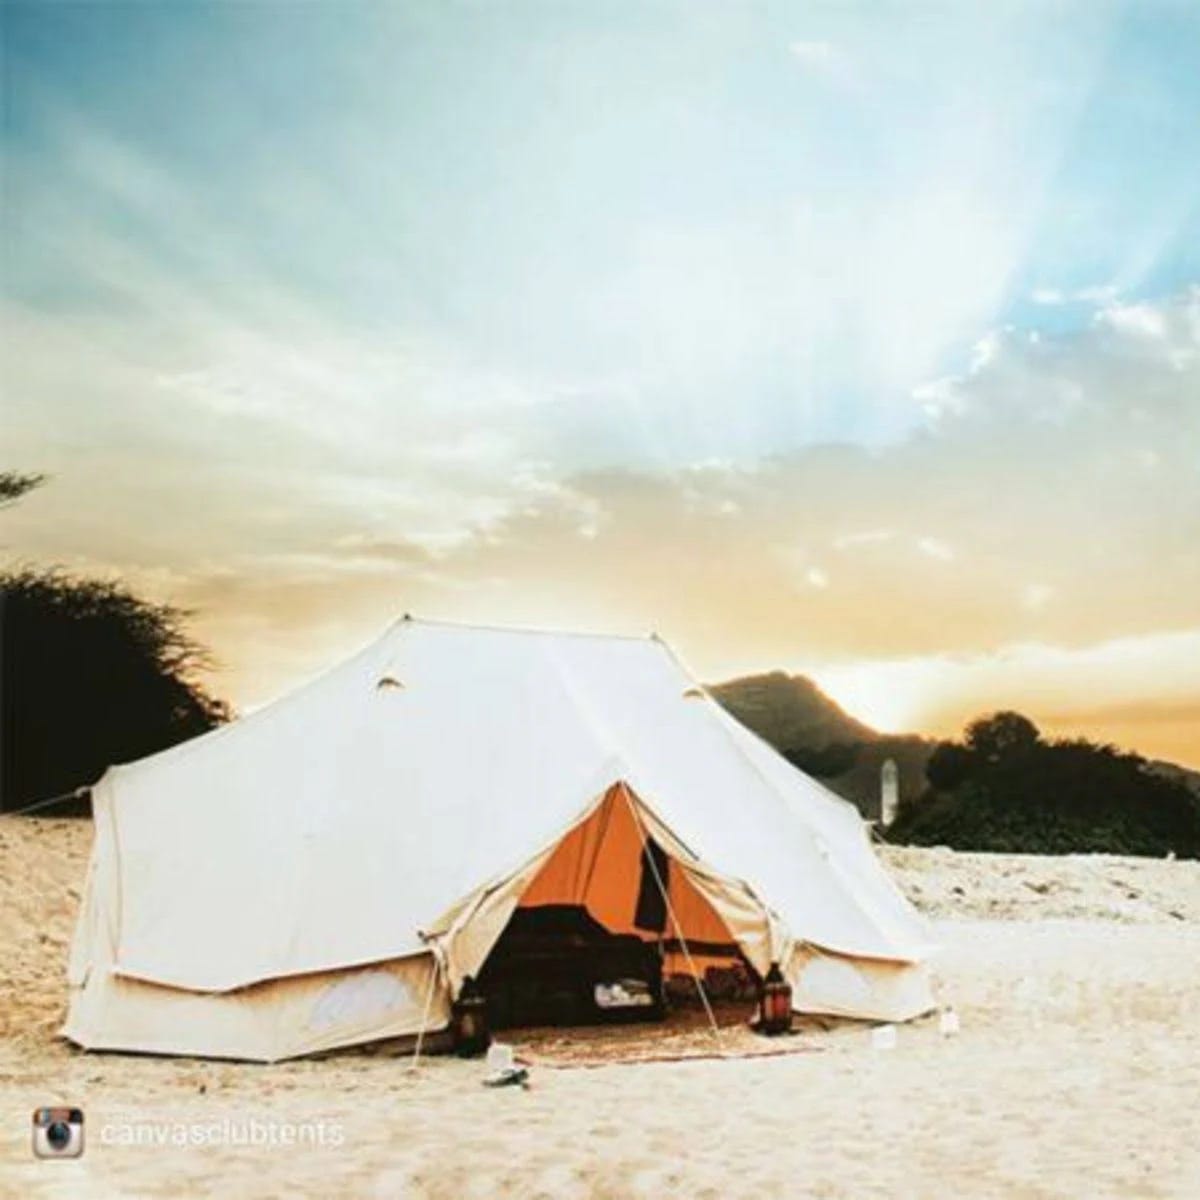 Sibley 600 Twin Pro Green: A Luxurious Glamping Tent | Image